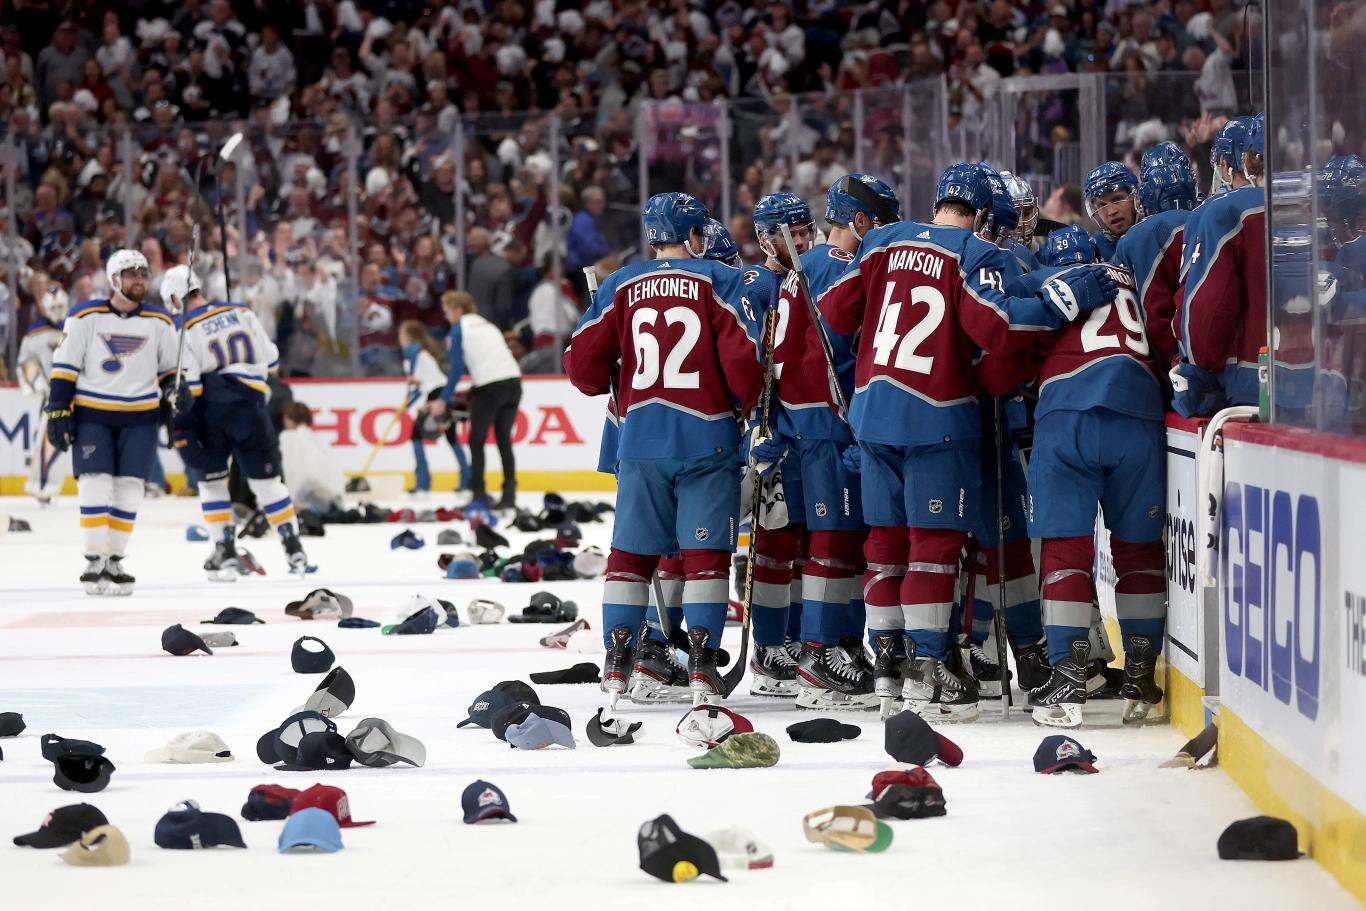 hats on the ice after Nathan MacKinnon scored his third goal